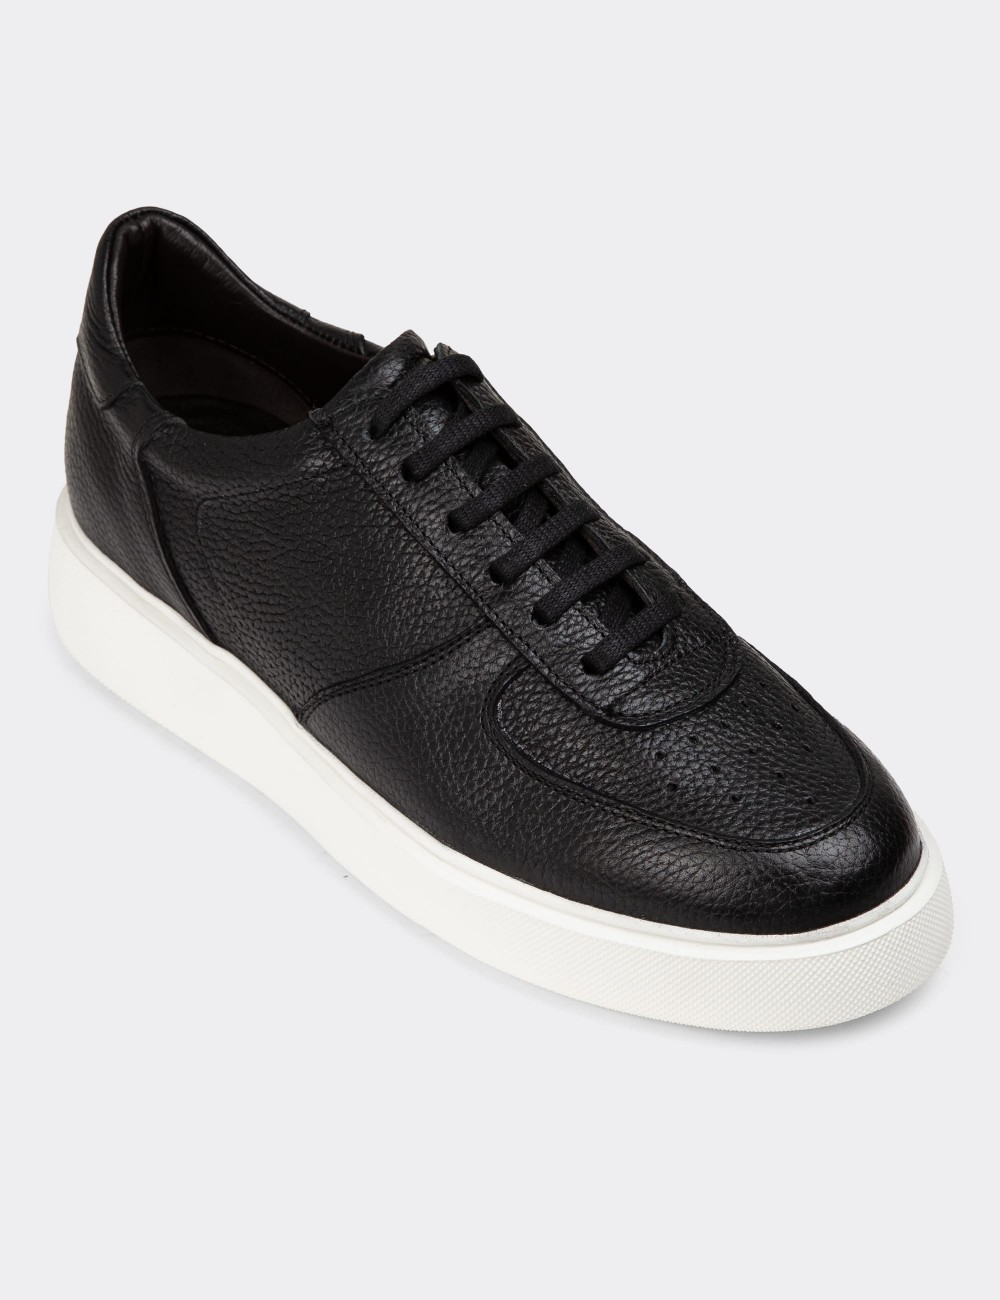 Black Leather Sneakers - 01965MSYHE01